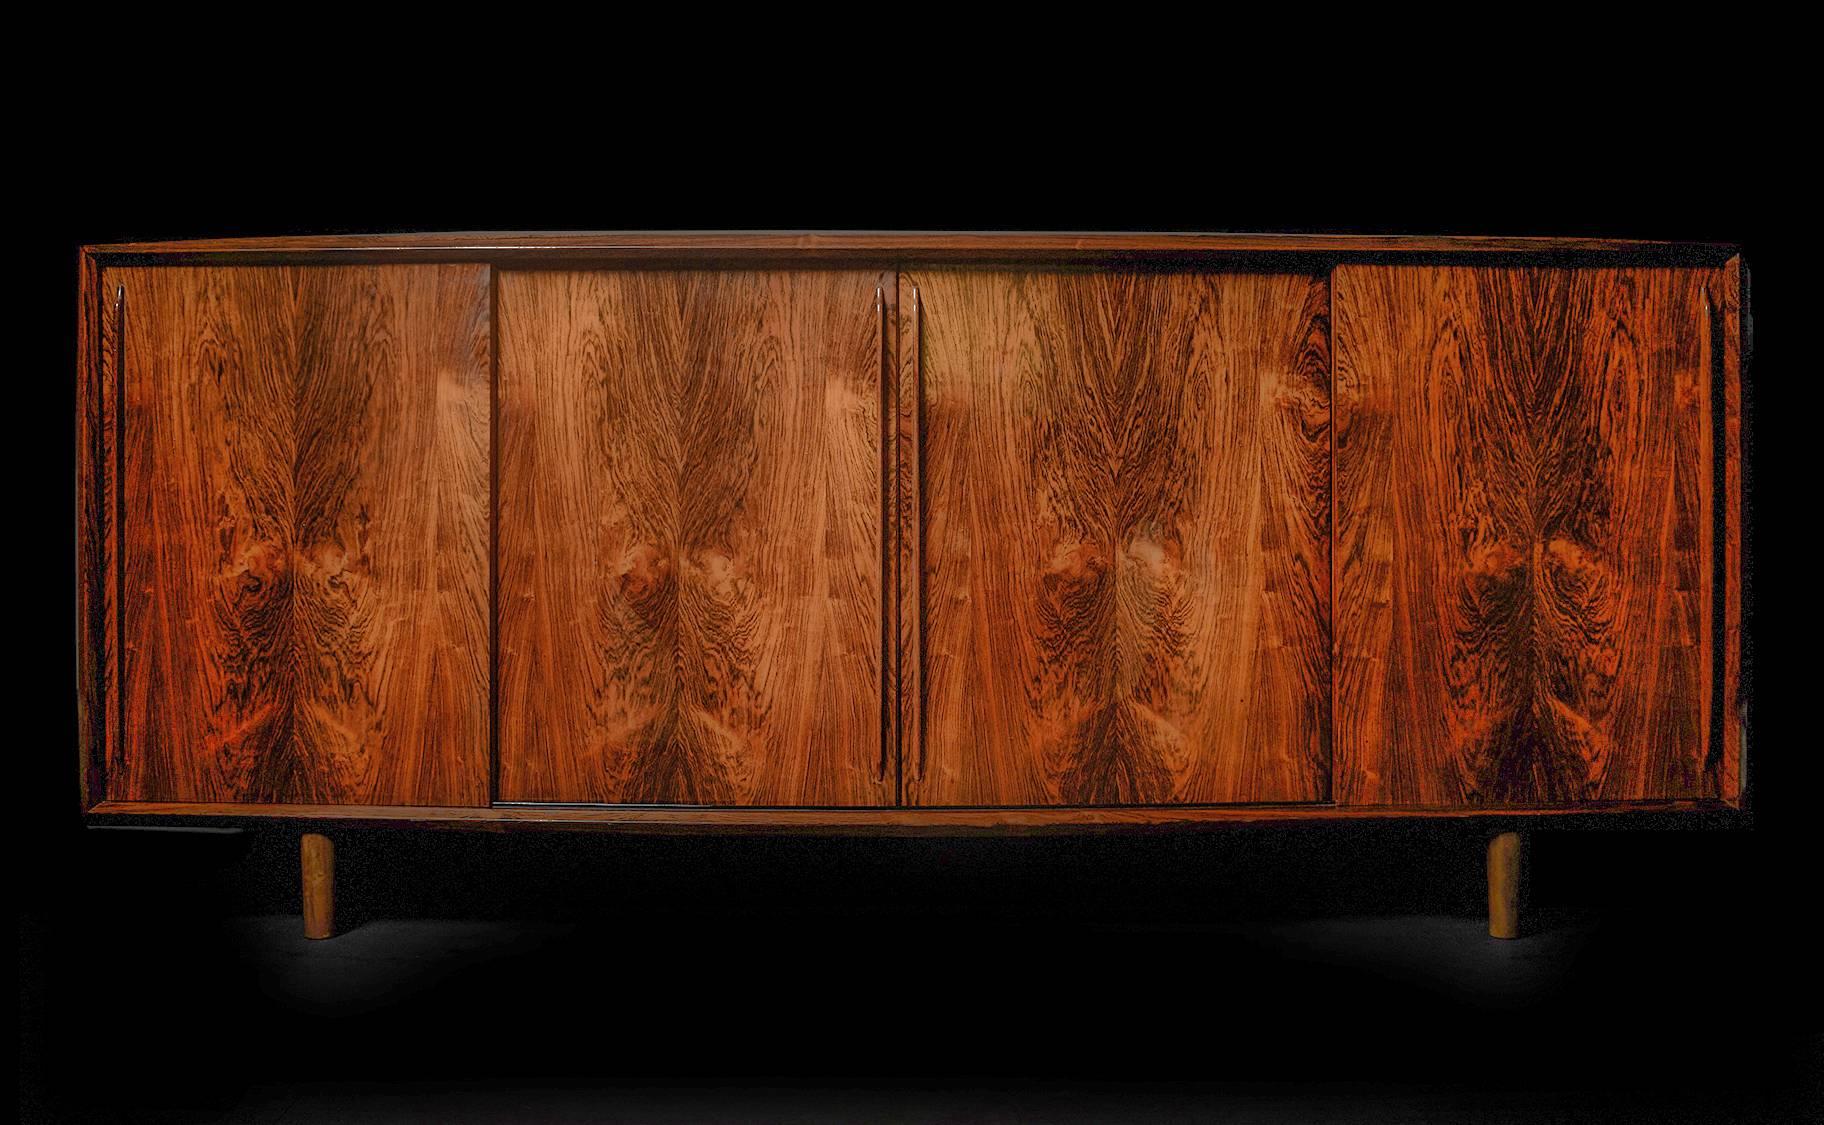 An exemplar of elegant simplicity, crafted in Brazilian rosewood with handsomely refined lines and meticulous joinery, executed with an expert level of craftsmanship. Beautiful rich tones and patina. This is a timeless piece with excellent